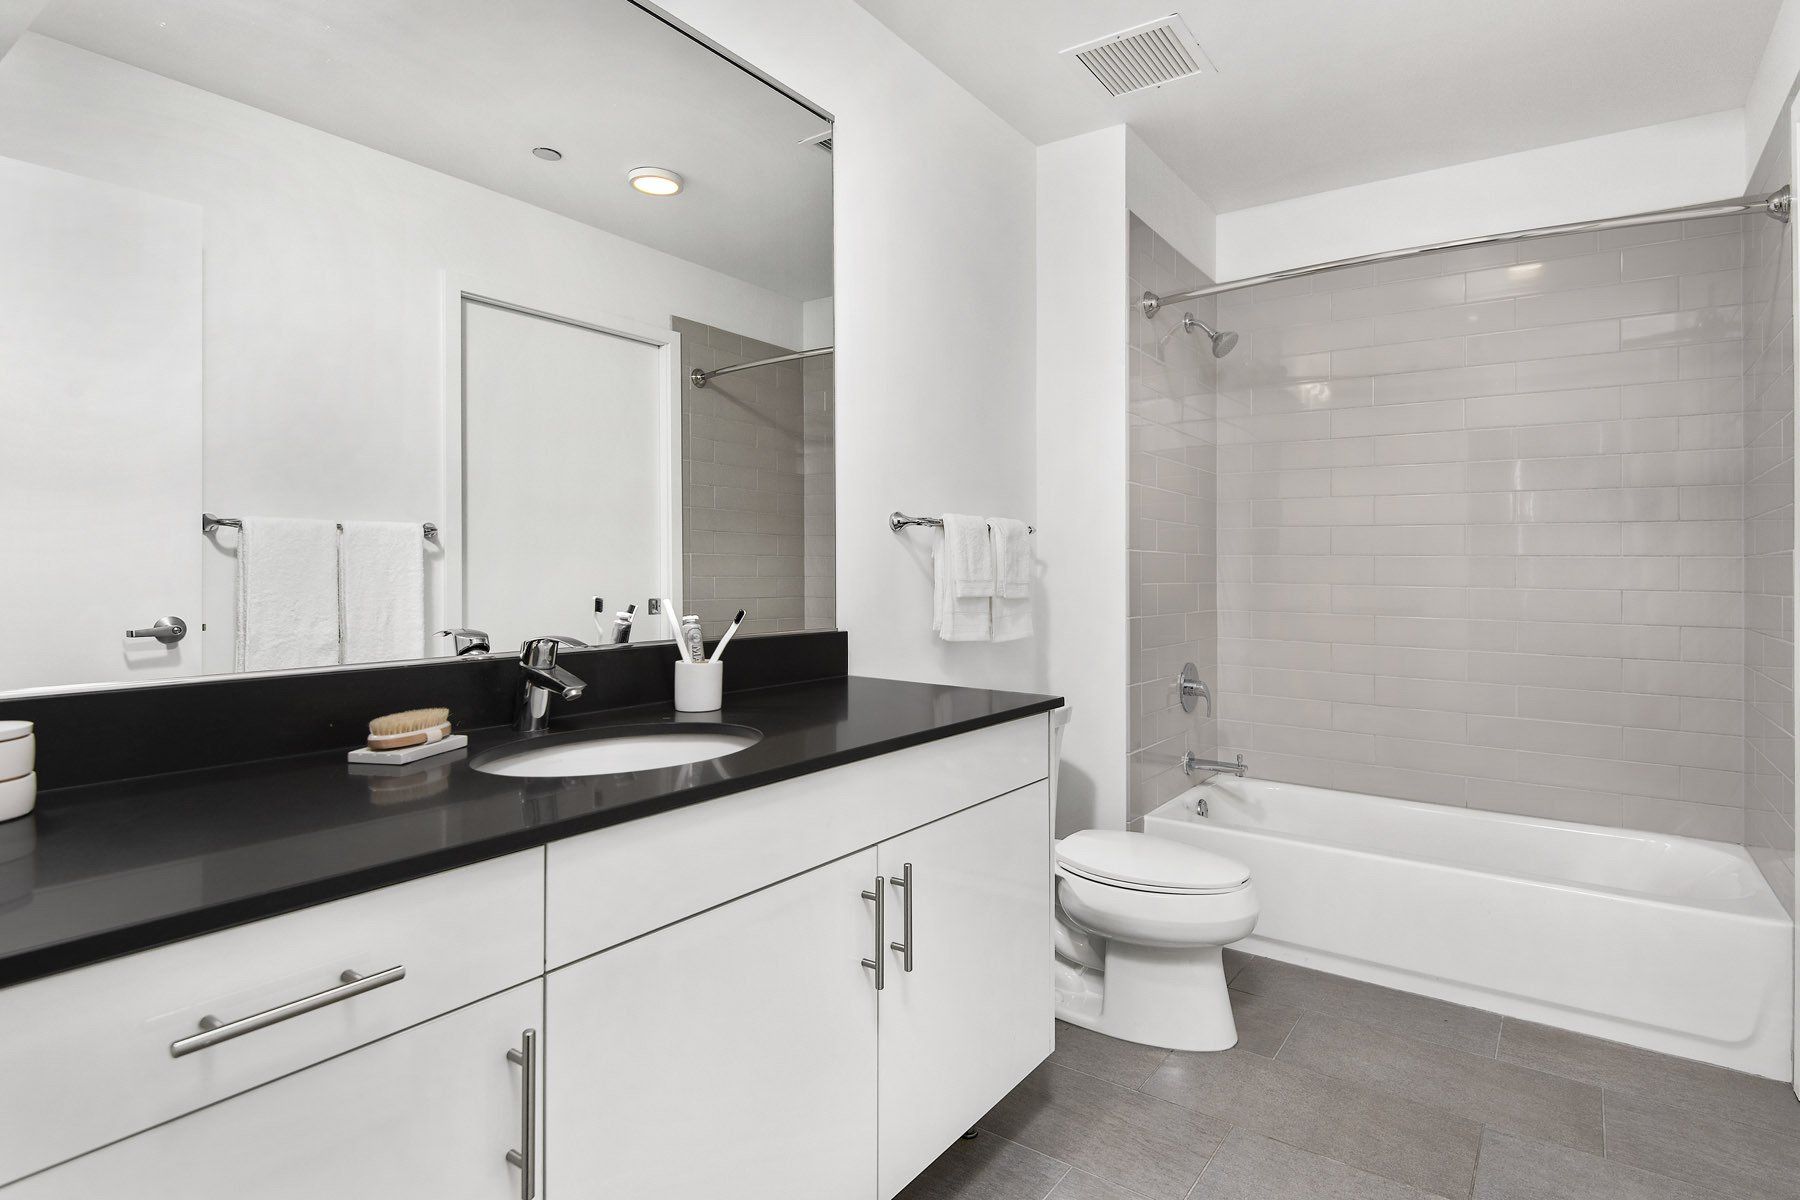 Modern bathroom with tub at Reside on Green Street.